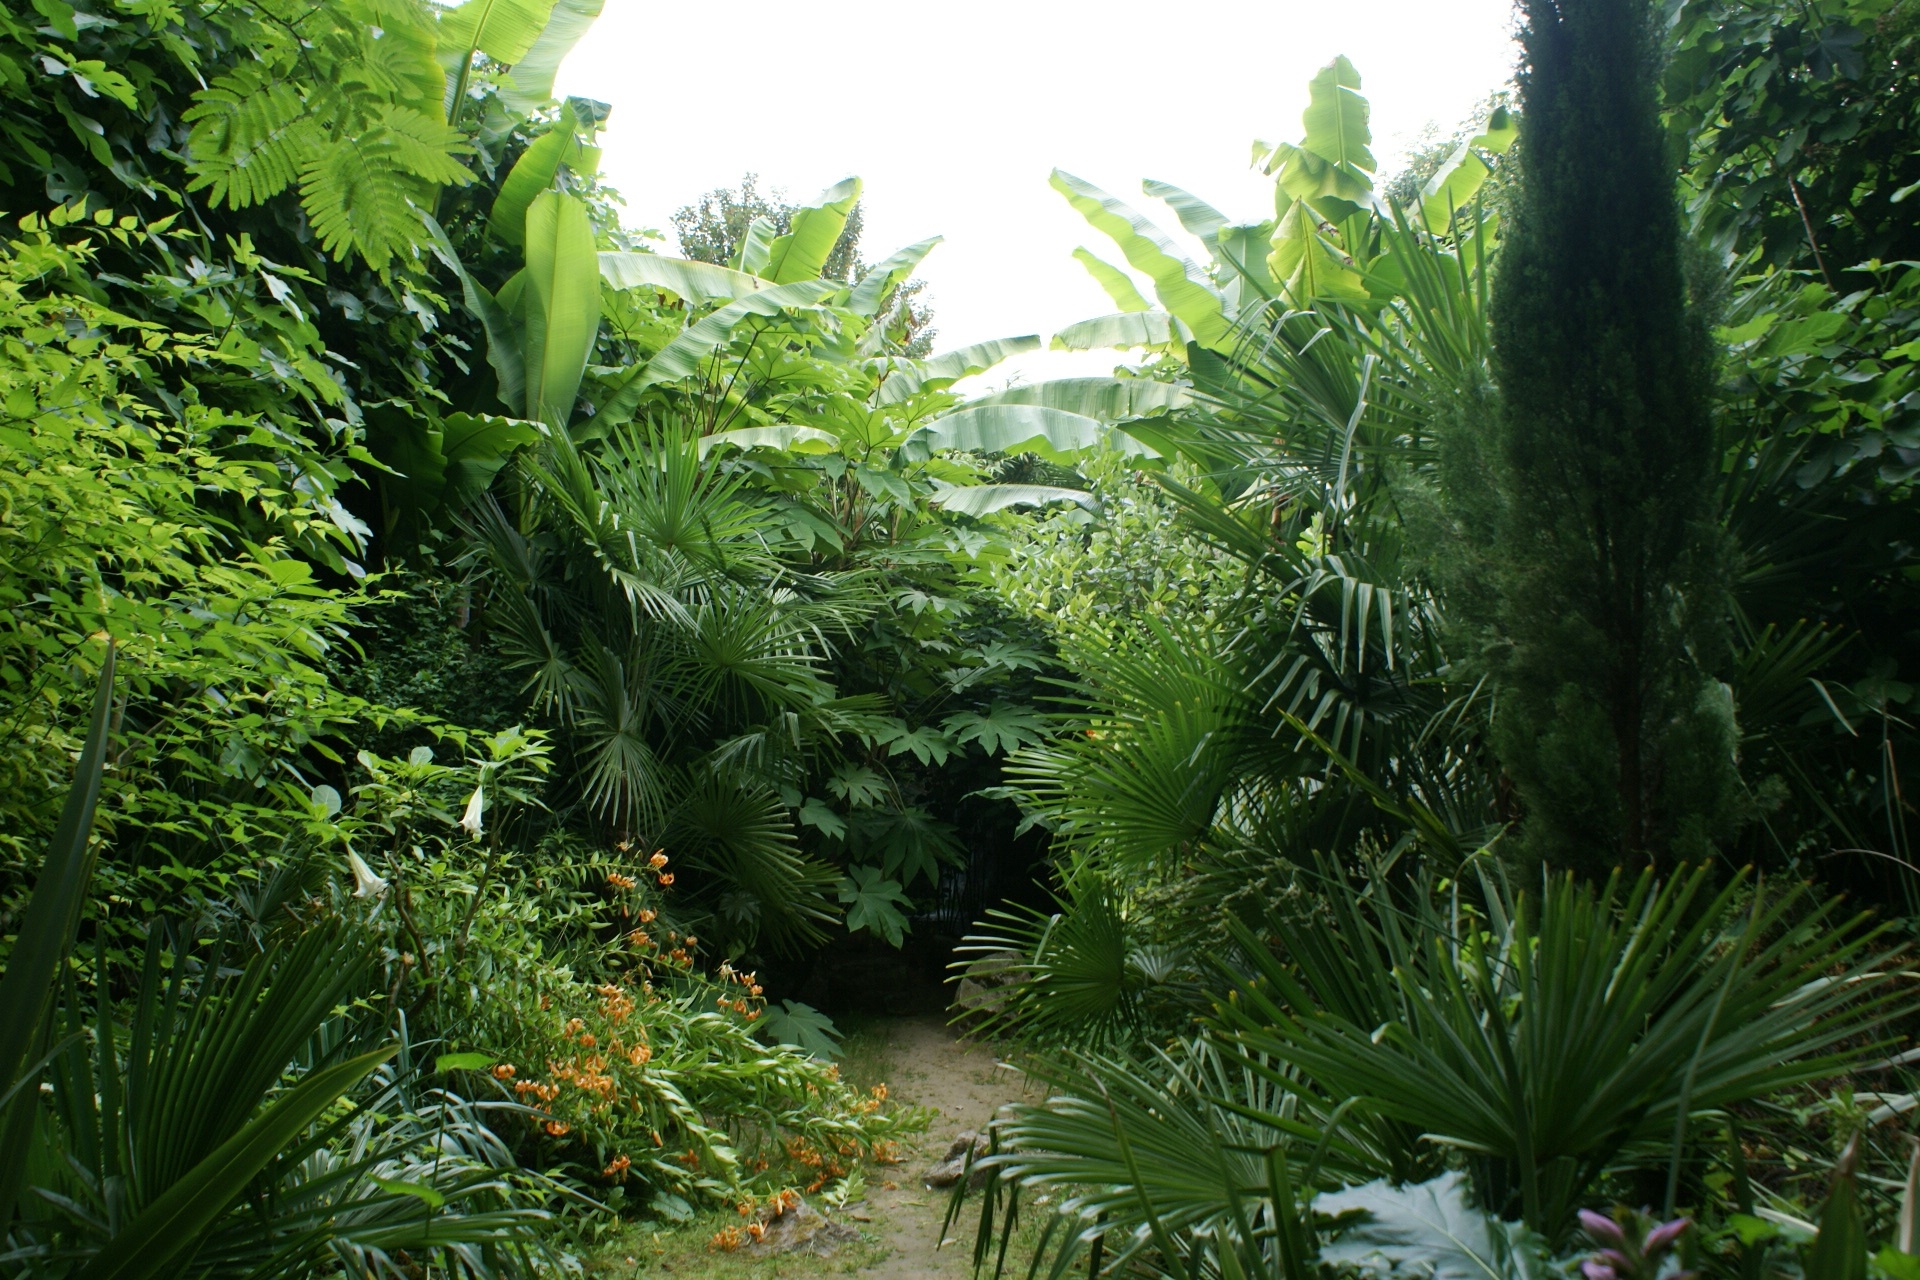 Exotic garden at the Château de Vendeuvre in the Calvados region of Normandy